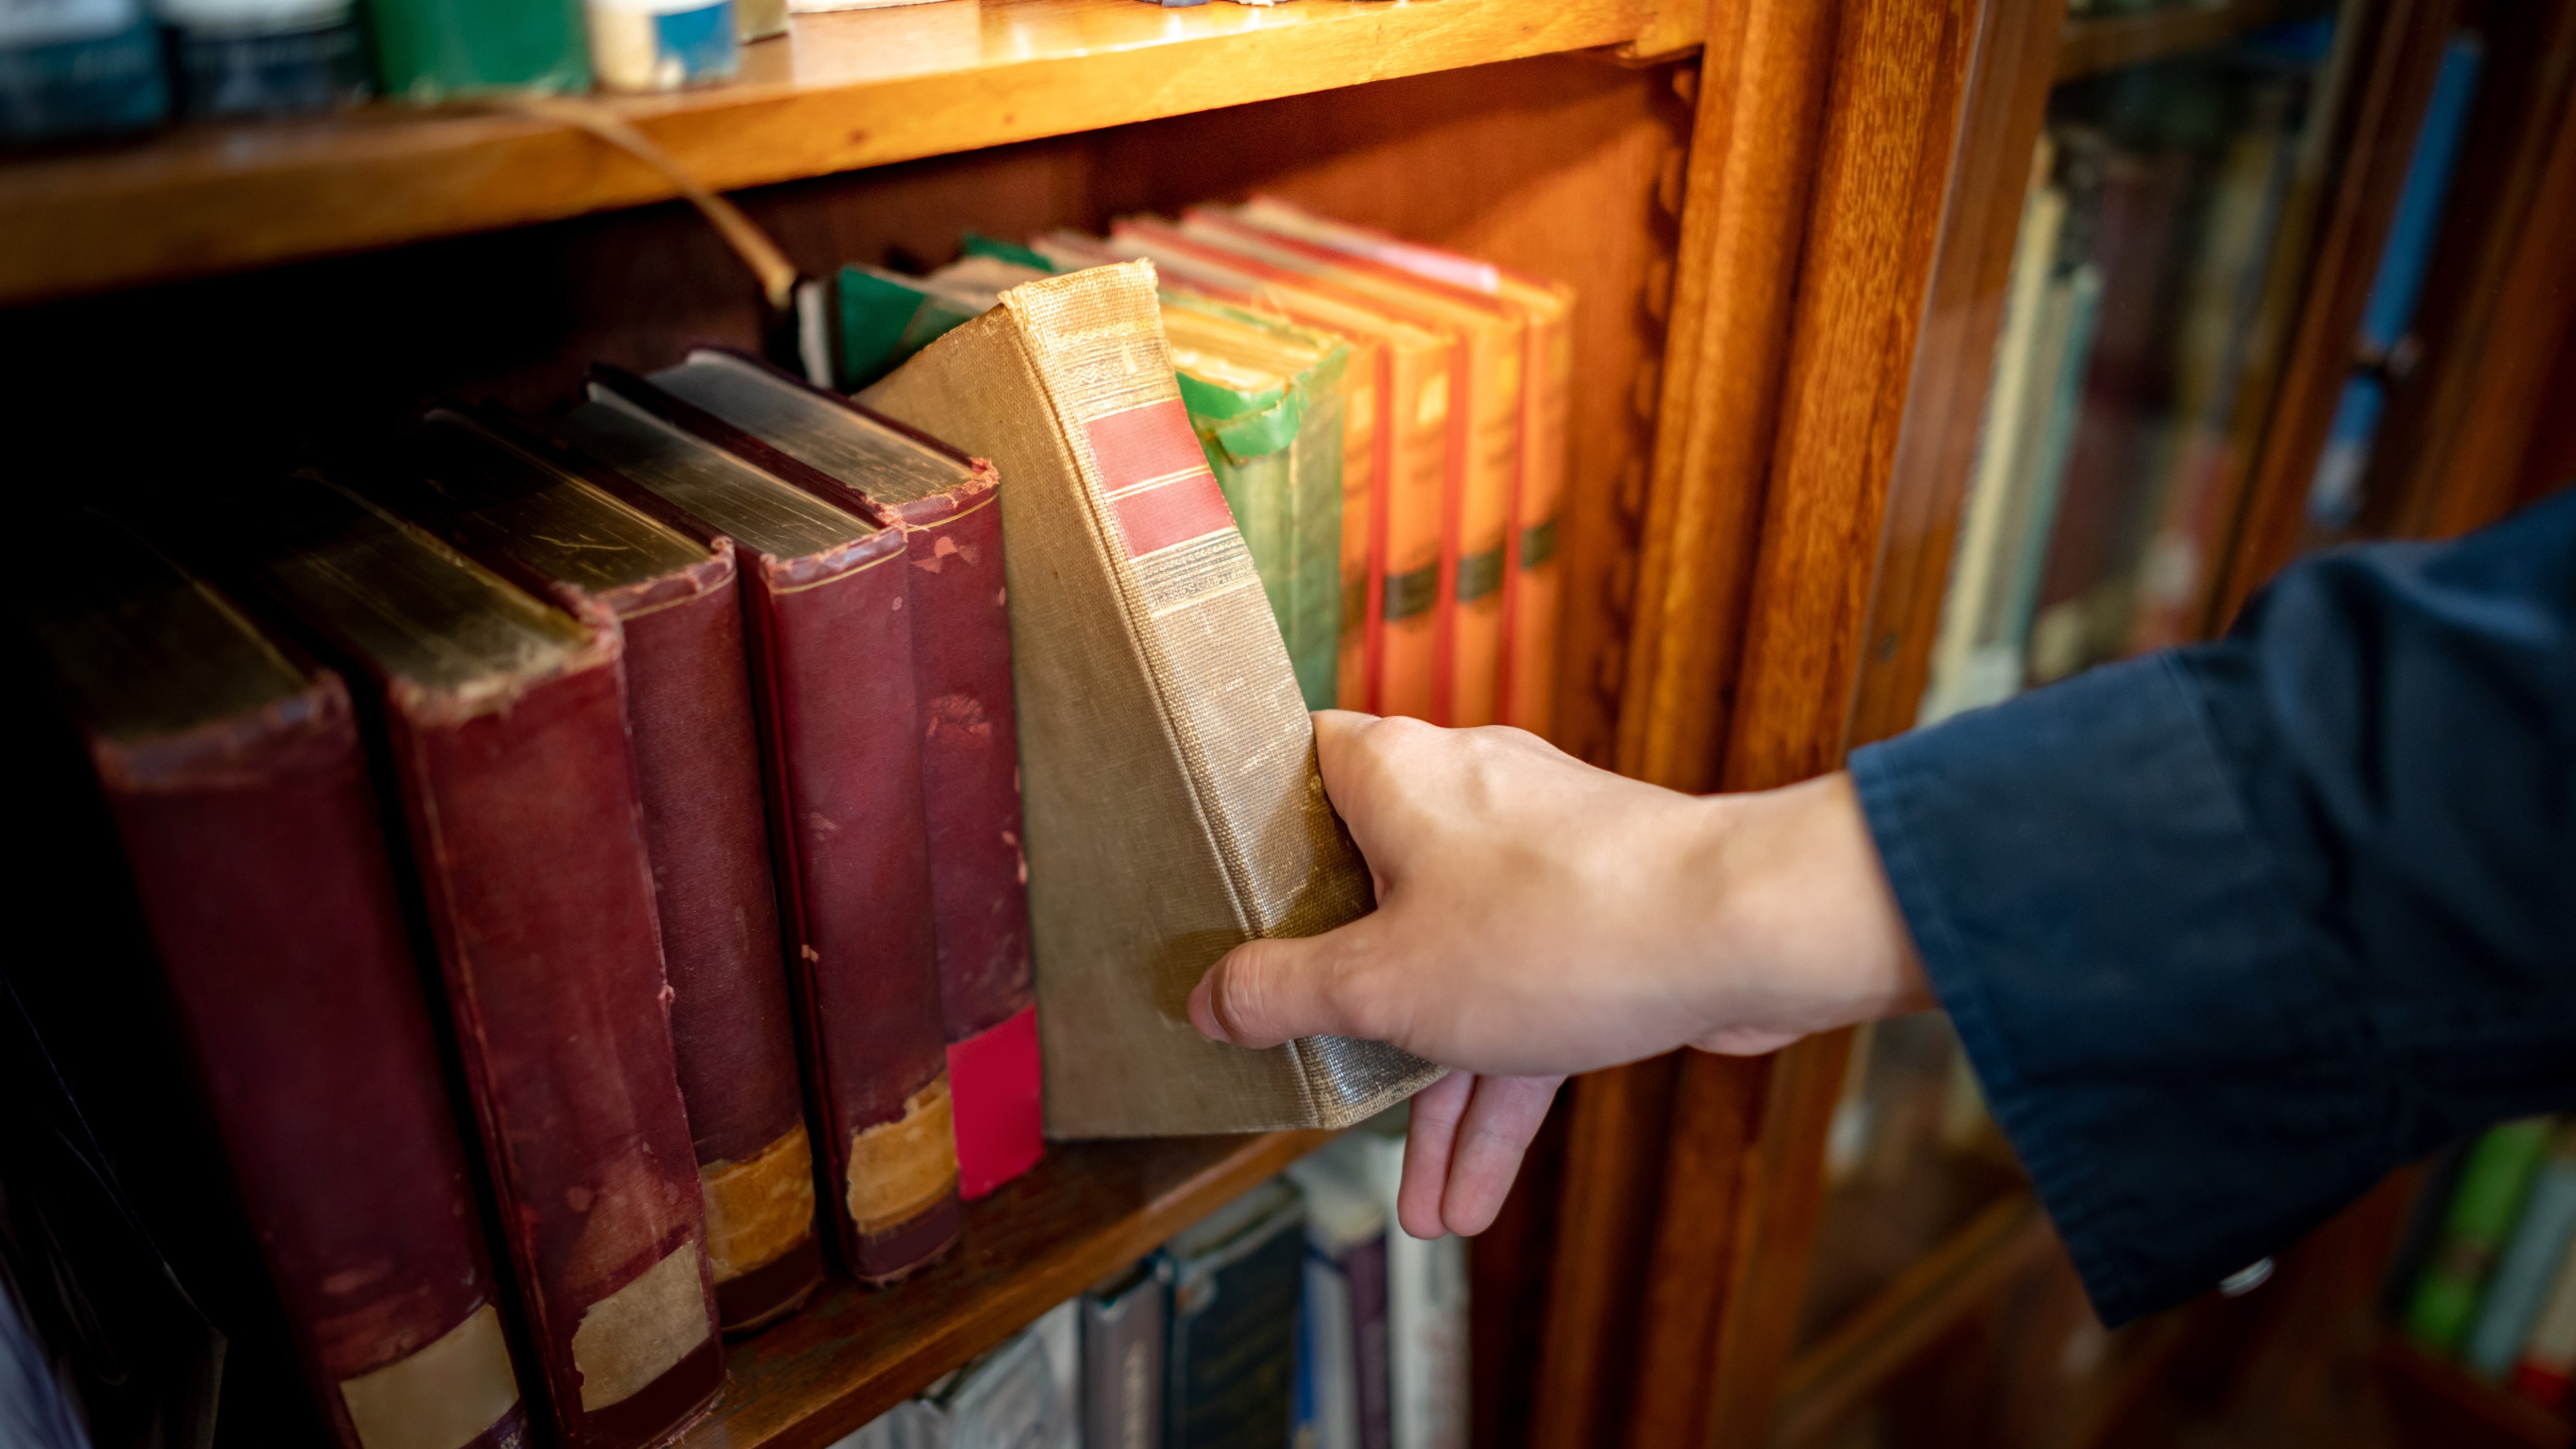 Person reaching for a worn book on a bookshelf